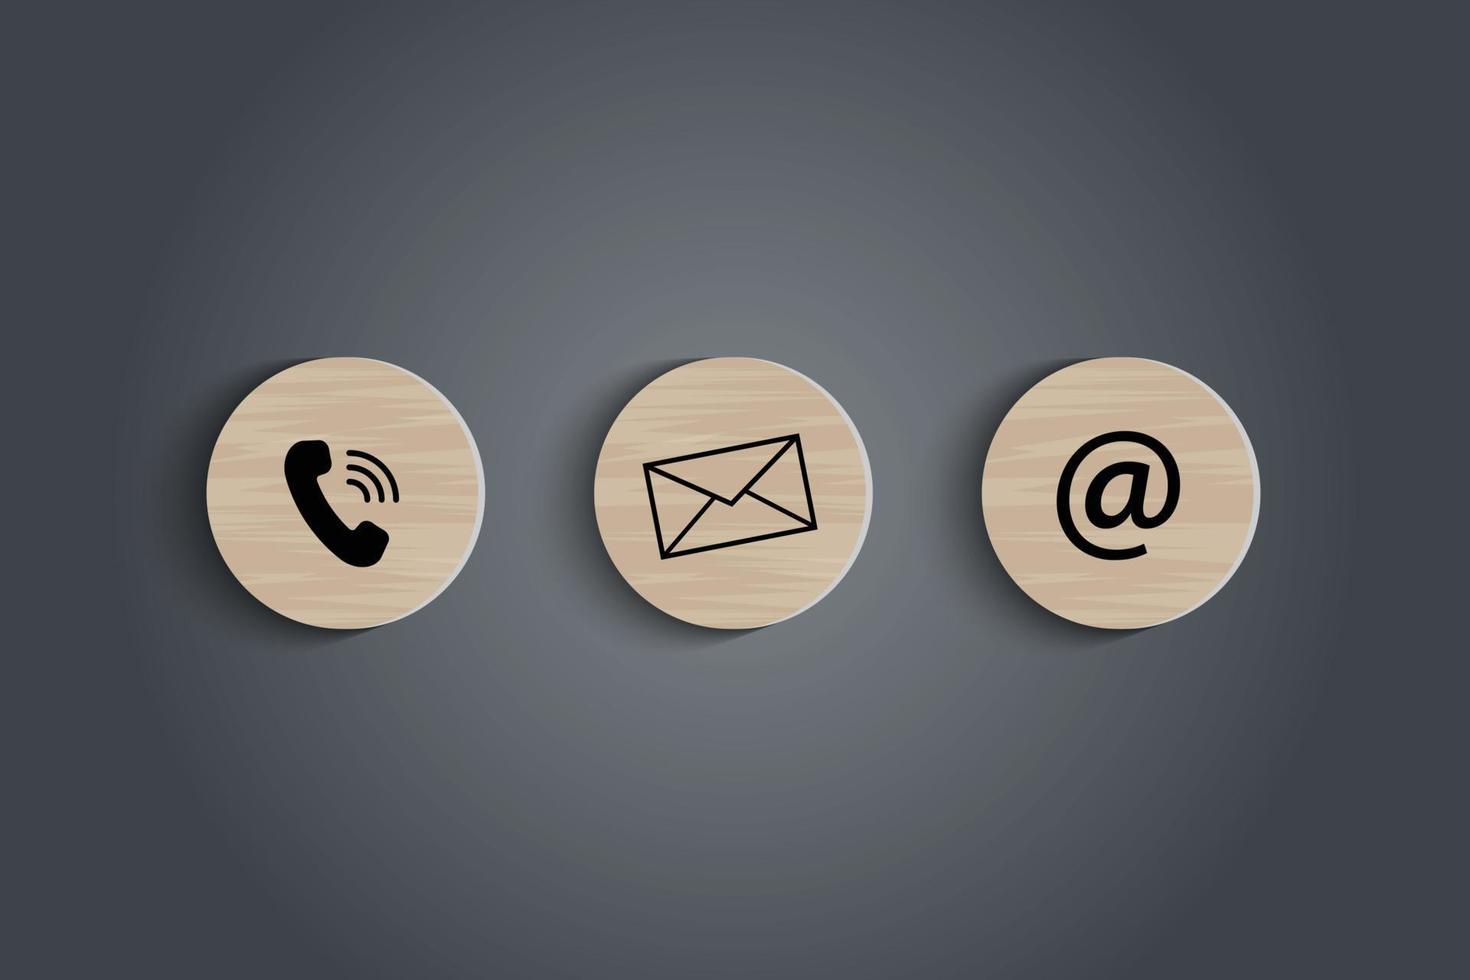 E-mail address ,telephone number and letter icons print screen on circle wooden block on table for webpage business contact and customer service concept. Vector illustrator